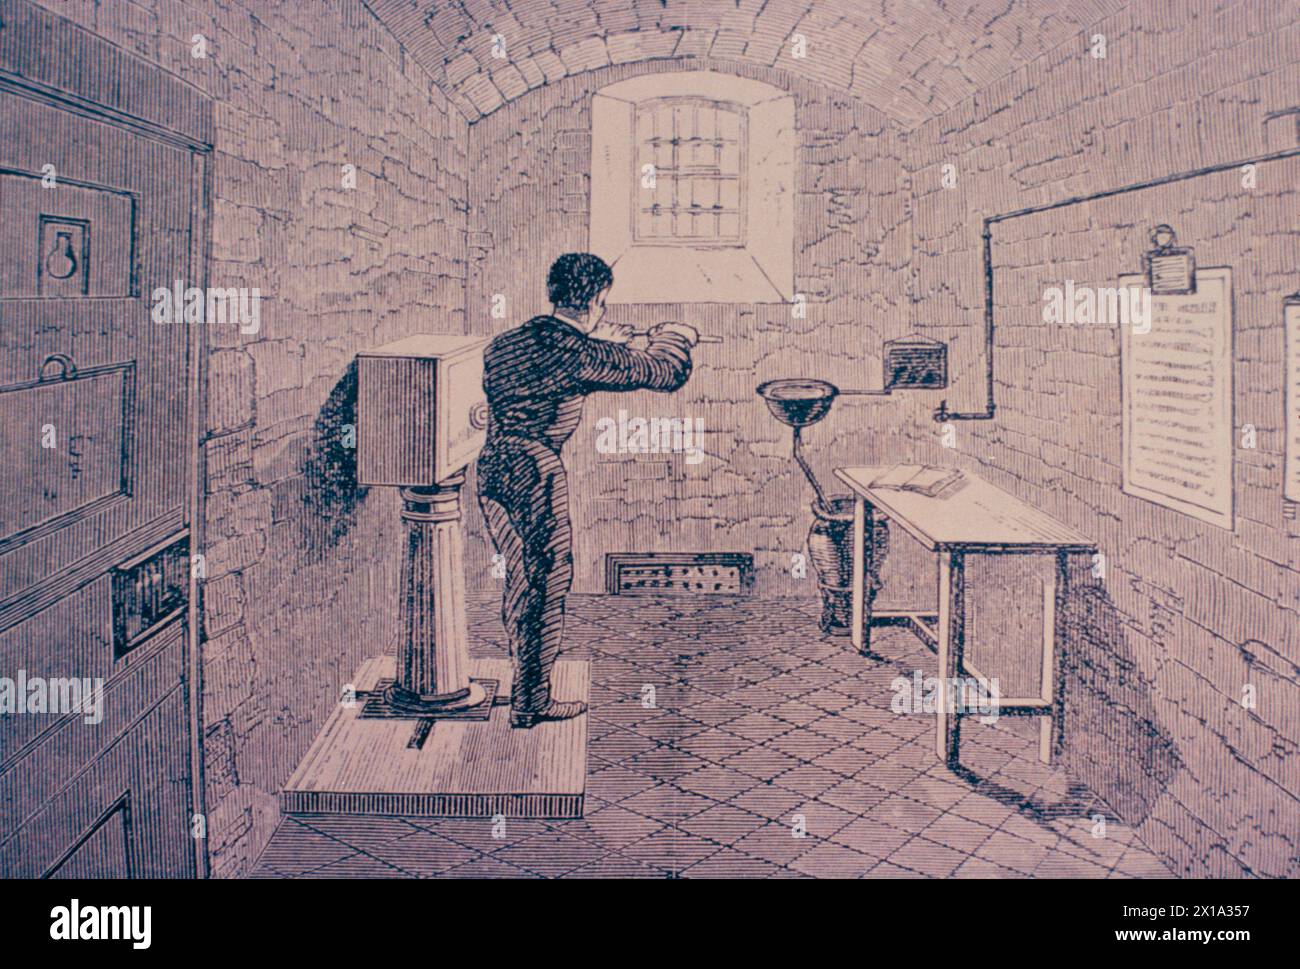 A cell with a prisoner at crank labor in the Surrey House of Correction,London, England 1862 Stock Photo